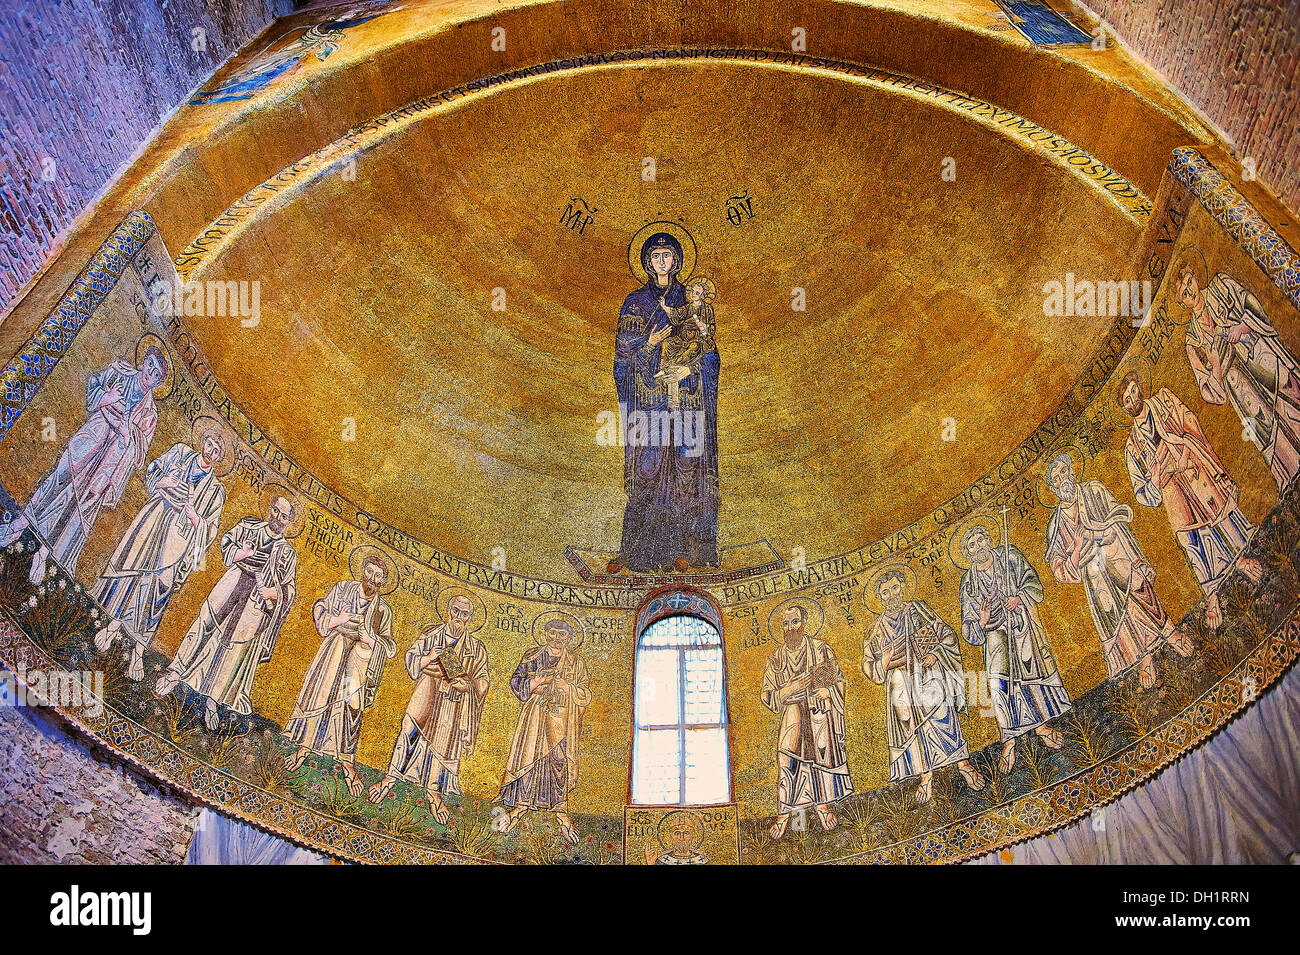 Byzantine Mosaics of the Virgin Mary and Child above the altar of the Cathedral of Santa Maria Assunta. Torcello Venice Stock Photo